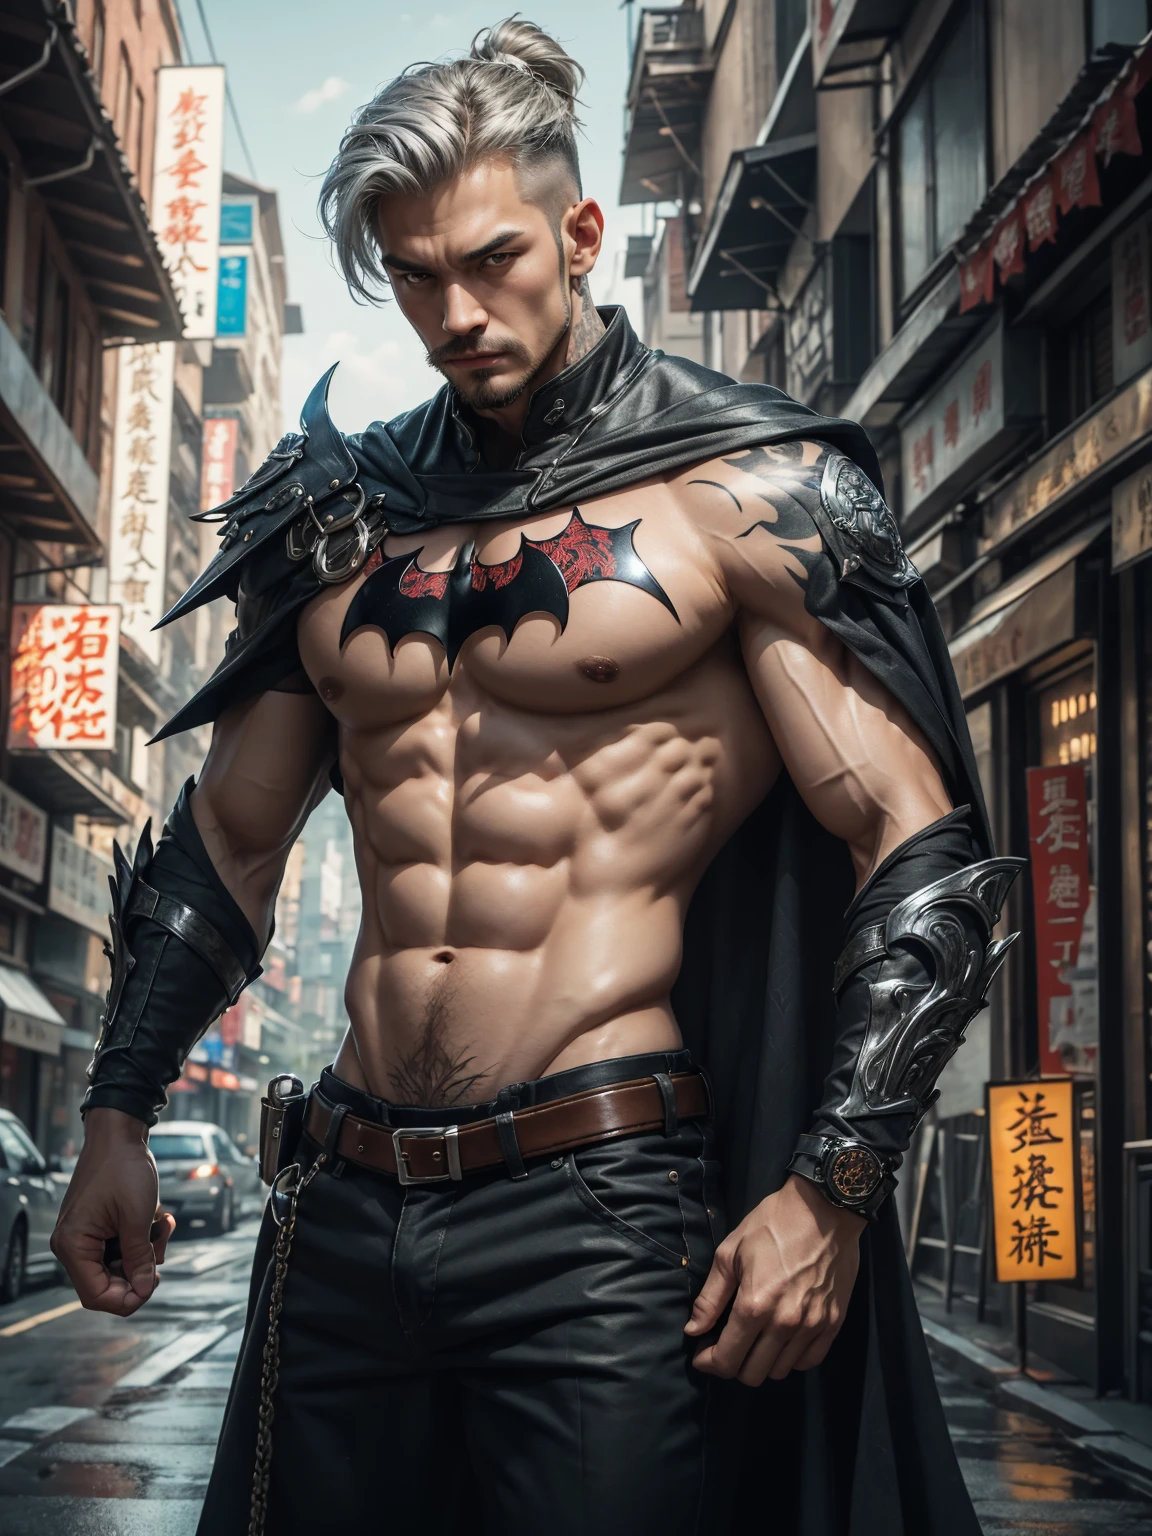 创建surrealof正义联盟蝙蝠侠角色，Perfectly lit ofSuper detailed armor Vetimenta Detailed Very realistic ofhigh resolution 8k ！Carefully carved eyes！Wearing a Batman mask ((（silver sound）Titanium Batwing))!（（The background is a city night view photo,Striking a cool pose！ Sci-Fi Fantasy Wallpapers, Sci-fi fantasy desktop wallpaper, fantasy planet, Fantasy space, fantasy scifi, Epic of beautiful space science fiction, Epic fantasy landscape, epic science fiction fantasy art, fantasy scifi, epic fantasy scifi illustration, Impressive fantasy scenery, In fantasy scifi city））！！！8k ultra high definition，Gorgeous of accessories！Carefully carved eyes！（（masterpiece）），（Colorful）（（Very short of hair））），original，realistically，Crazy of detail，The eyes have bright spots！There is a lot of chest hair！Just the right amount of color for a beard）（Handsome of figure），cloud，Handsome muscular man），Crazy Gorgeous Batman Costumes！Stubble masculinity）），a paradise，Cloud Doji，Crazy Gorgeous Batman Costumes）），（（Have a tattoo））（Realistic textured skin），!The whole body is covered Have a tattoo！Large area tattoo！Short hair detail，Shaved on both sides！(High detail8k)！！1 cm! 70kg!!Tan of skin, [ Short hair detail, Shaved on both sides, silver white ]!! Super detailed, Best of quality, Strong lighting, sharp focus, theater audience, Upward of the lens is closer to the body, (( Body fat 55%，Short hair detail！ shave the sides short, silver whey health, I have hair on my chest, body hair, , Showing hairy armpits, Hairy legs, silver hair,)), ,Muscular of Guigachad, super awesome and cool, with a beard、batman images,Handsome of Chad Chin, Handsome face庞和美丽of脸庞, big, male model, Derek, Handsome face, Handsome of man, Who is Shi Yu??????????????????????????????????????????????????????????????, Ross Tan, 27 years old, 28 years old, Young people with beautiful faces, Mark Edward Fish, Attractive male faces，sideways(！, big bulge ":1.2),(dynamic poses:1.1), big腿ofmasterpiece, Best of quality, high resolution, closeup portrait, male focus, solo focus, A man of, 35 years old, 、Ai Jia、low angle, body hair, grow a beard, weight loss，Stay healthy, I have hair on my chest, body hair, , Raised sexy，Showing hairy armpits, Hairy legs, mustache, model pose, Surprising composition, Front view, high dynamic range, smirk， , Eight-pack abs, Abs hair，of，Alpha male！, Raise your hands high, Short hair detail, Shaved on both sides, silver white, grow a beard, spark of light, Sexy big protruding！，There are small protrusions in the abdomen, detail, Belly and hairy belly are complicated， 8K post-production，Muscular character, Strong of masculine characteristics, muscular man pictures, Muscle bulge, muscular man, Muscular ofbig legs ８ｋ High detail,light, surreal, High detail, anatomically correct, Texture of skin,!high quality,Wide-angle lens！The entire body contains the calves！ low angle of view，Best of quality, high resolution, masterpiece, Acura